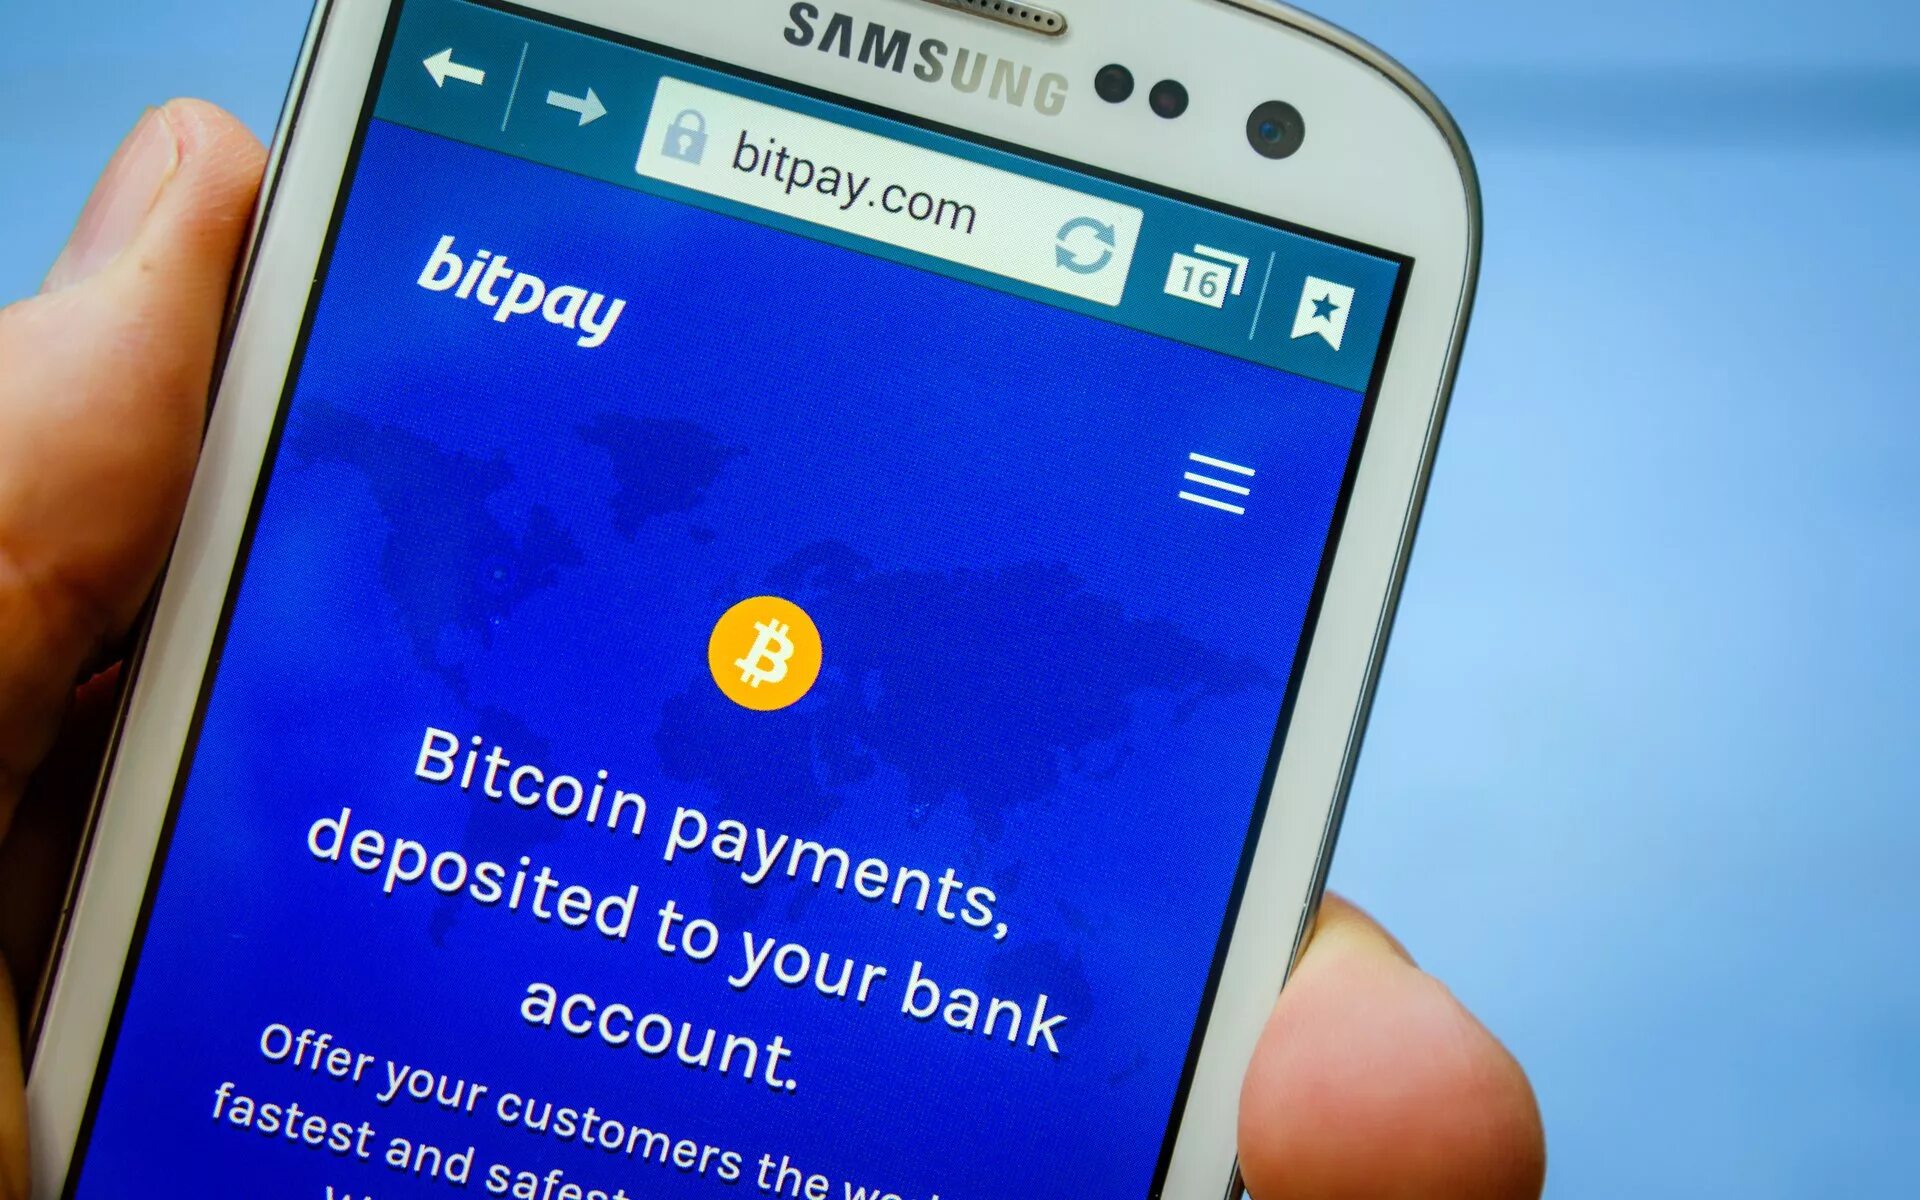 Fast accounts. BITPAY. BITPAY фото. Bitcoin payment. BITPAY mobile.